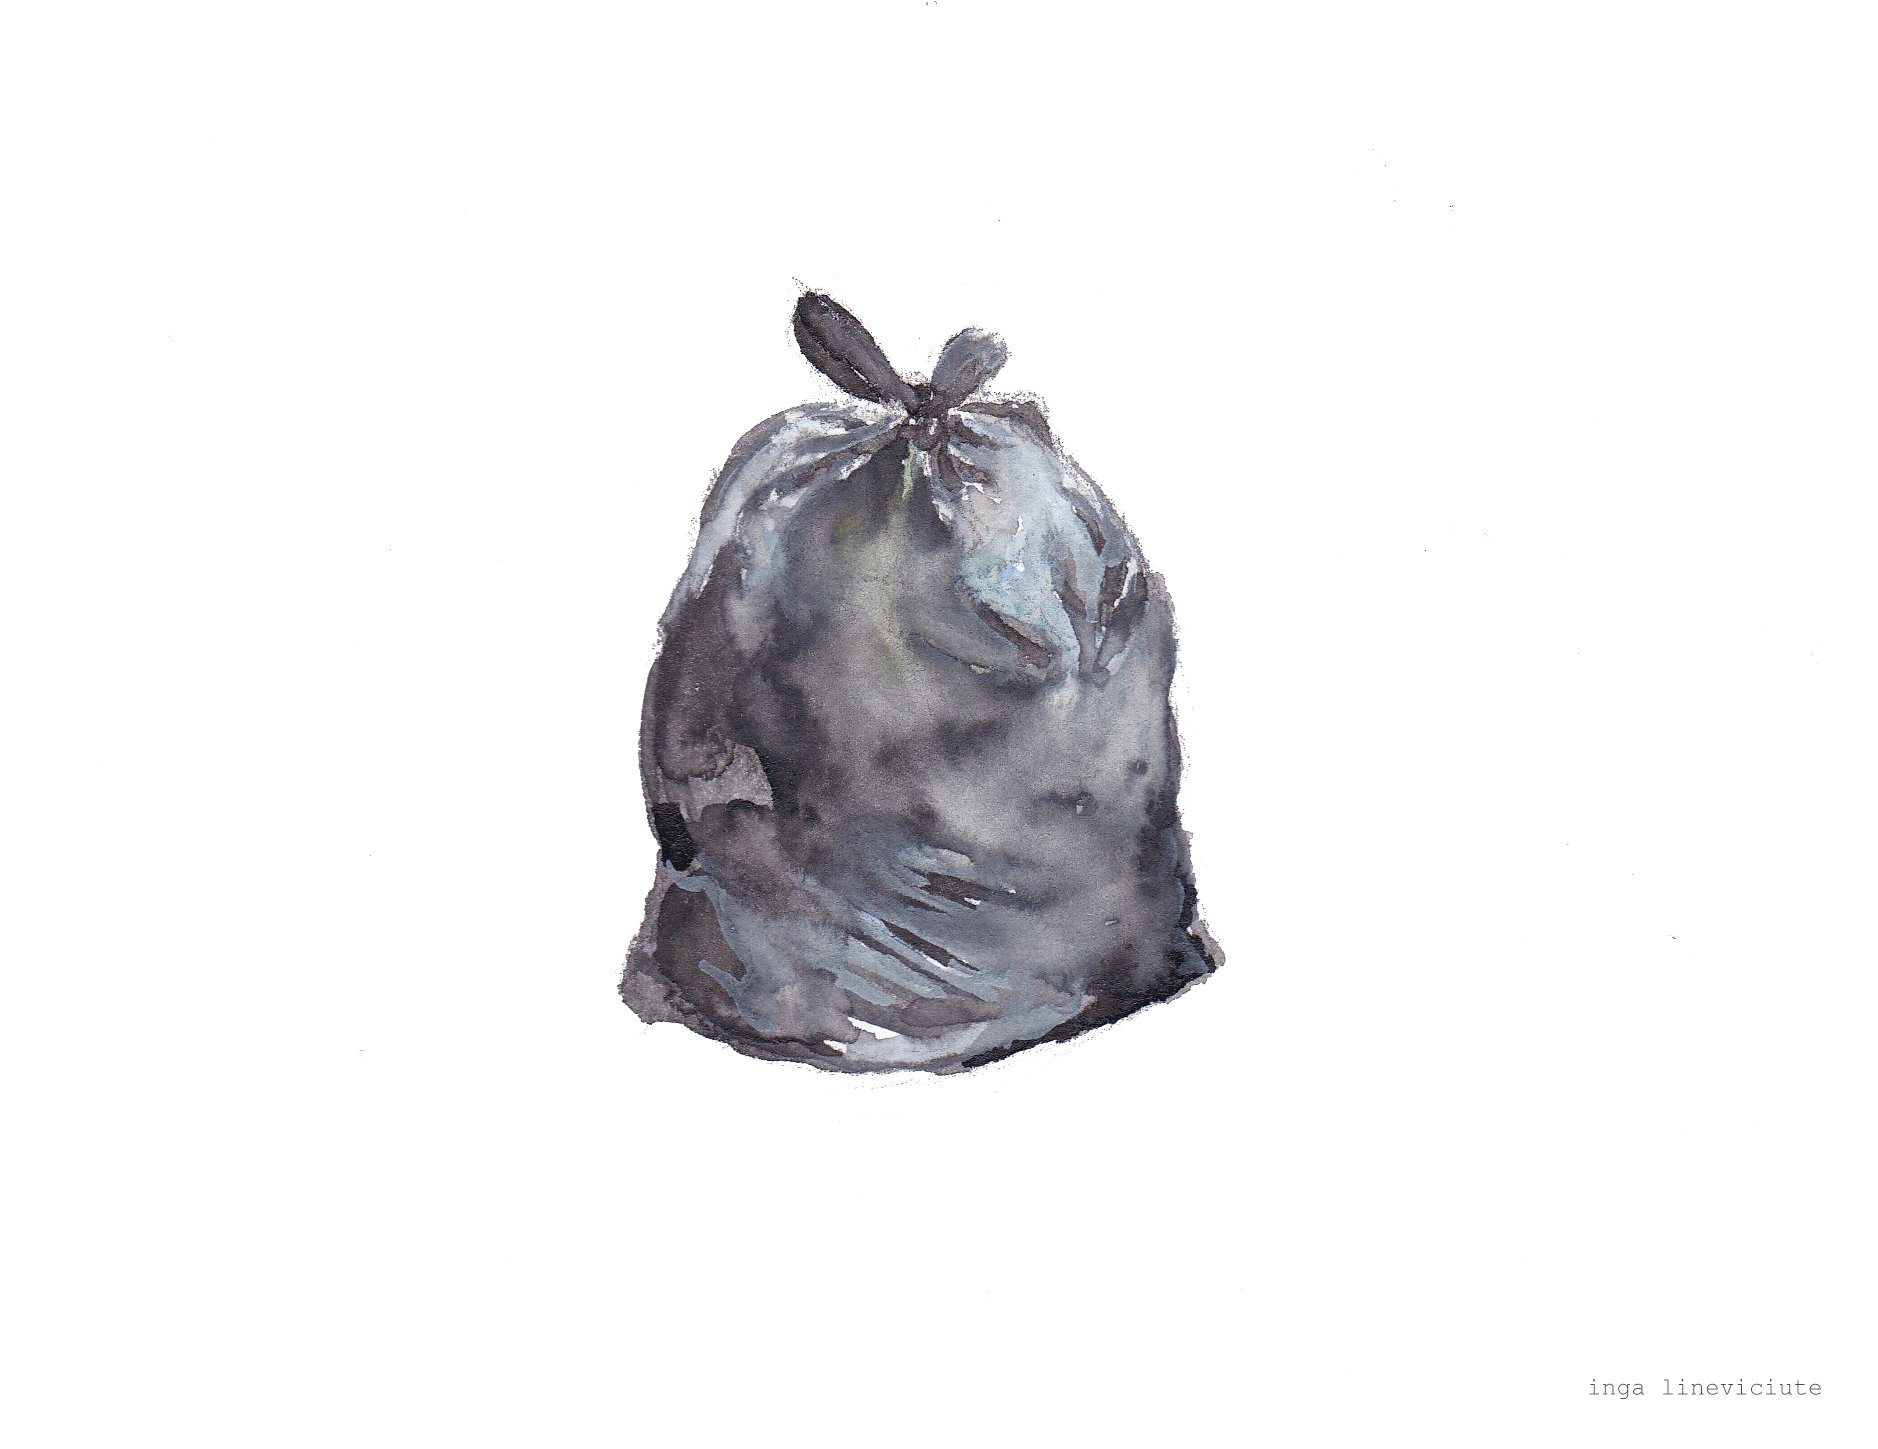 https://assets.bigcartel.com/product_images/258708059/Inga+Lineviciute+-+Rubbish+bag+_2020_.jpg?auto=format&fit=max&w=2000